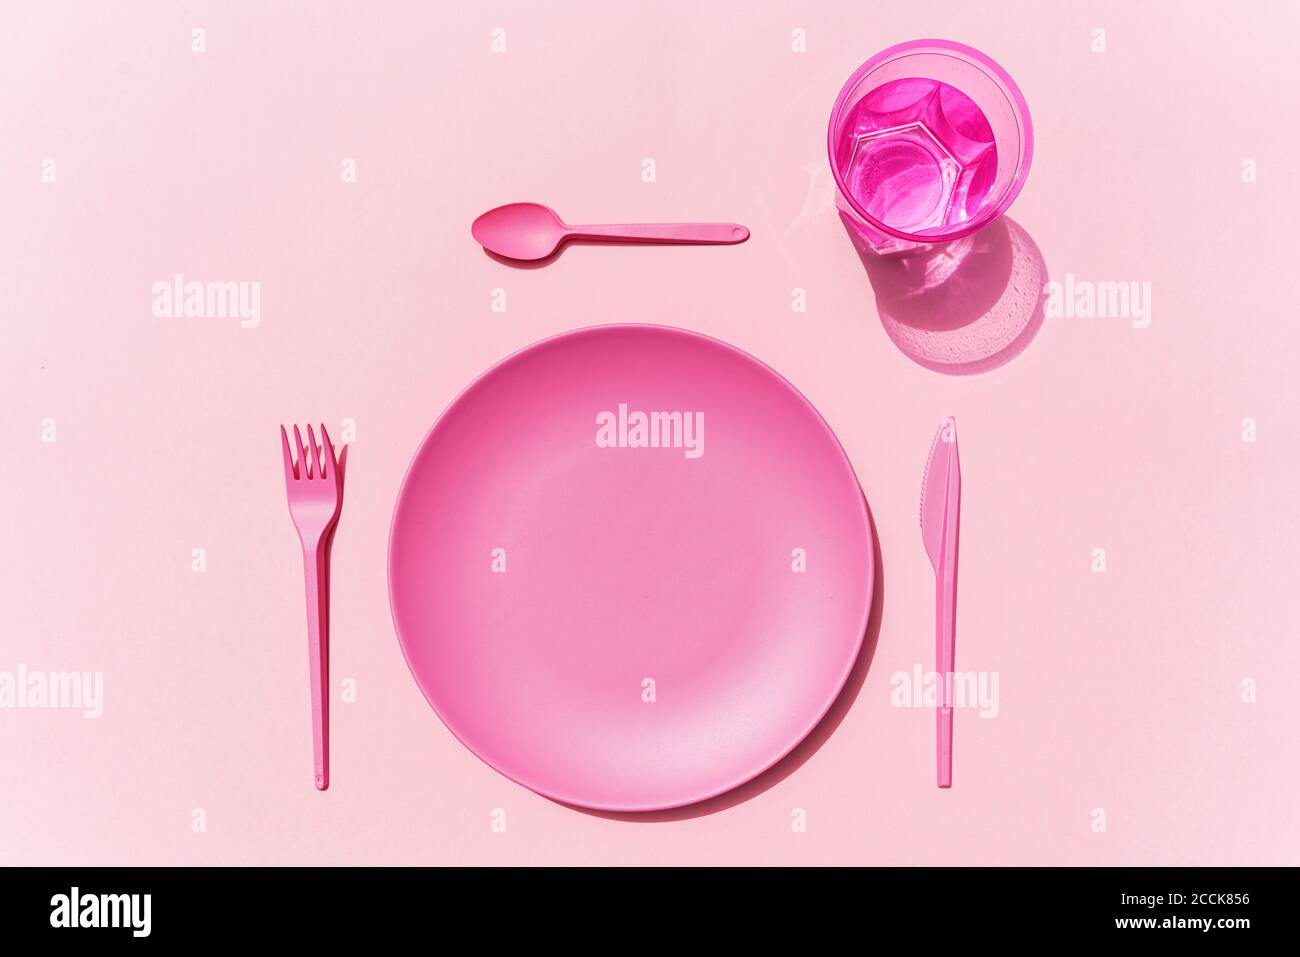 Studio shot of pink plastic plate, plastic cutlery and glass of water Stock Photo